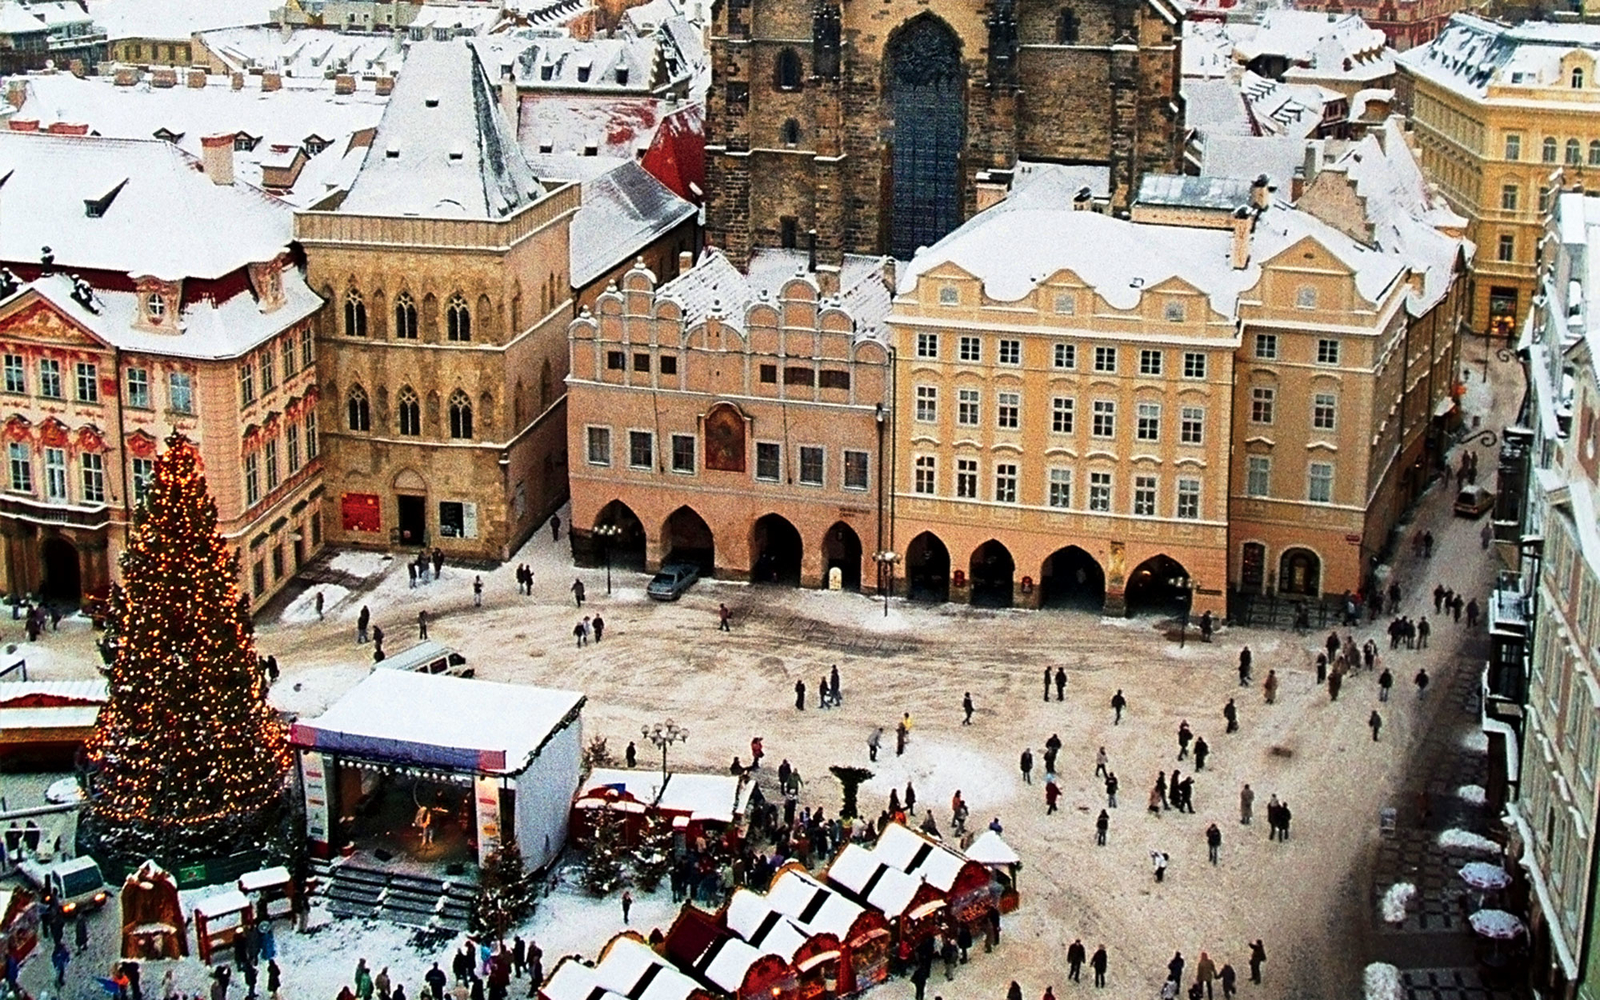 Prague in winter - central market place.